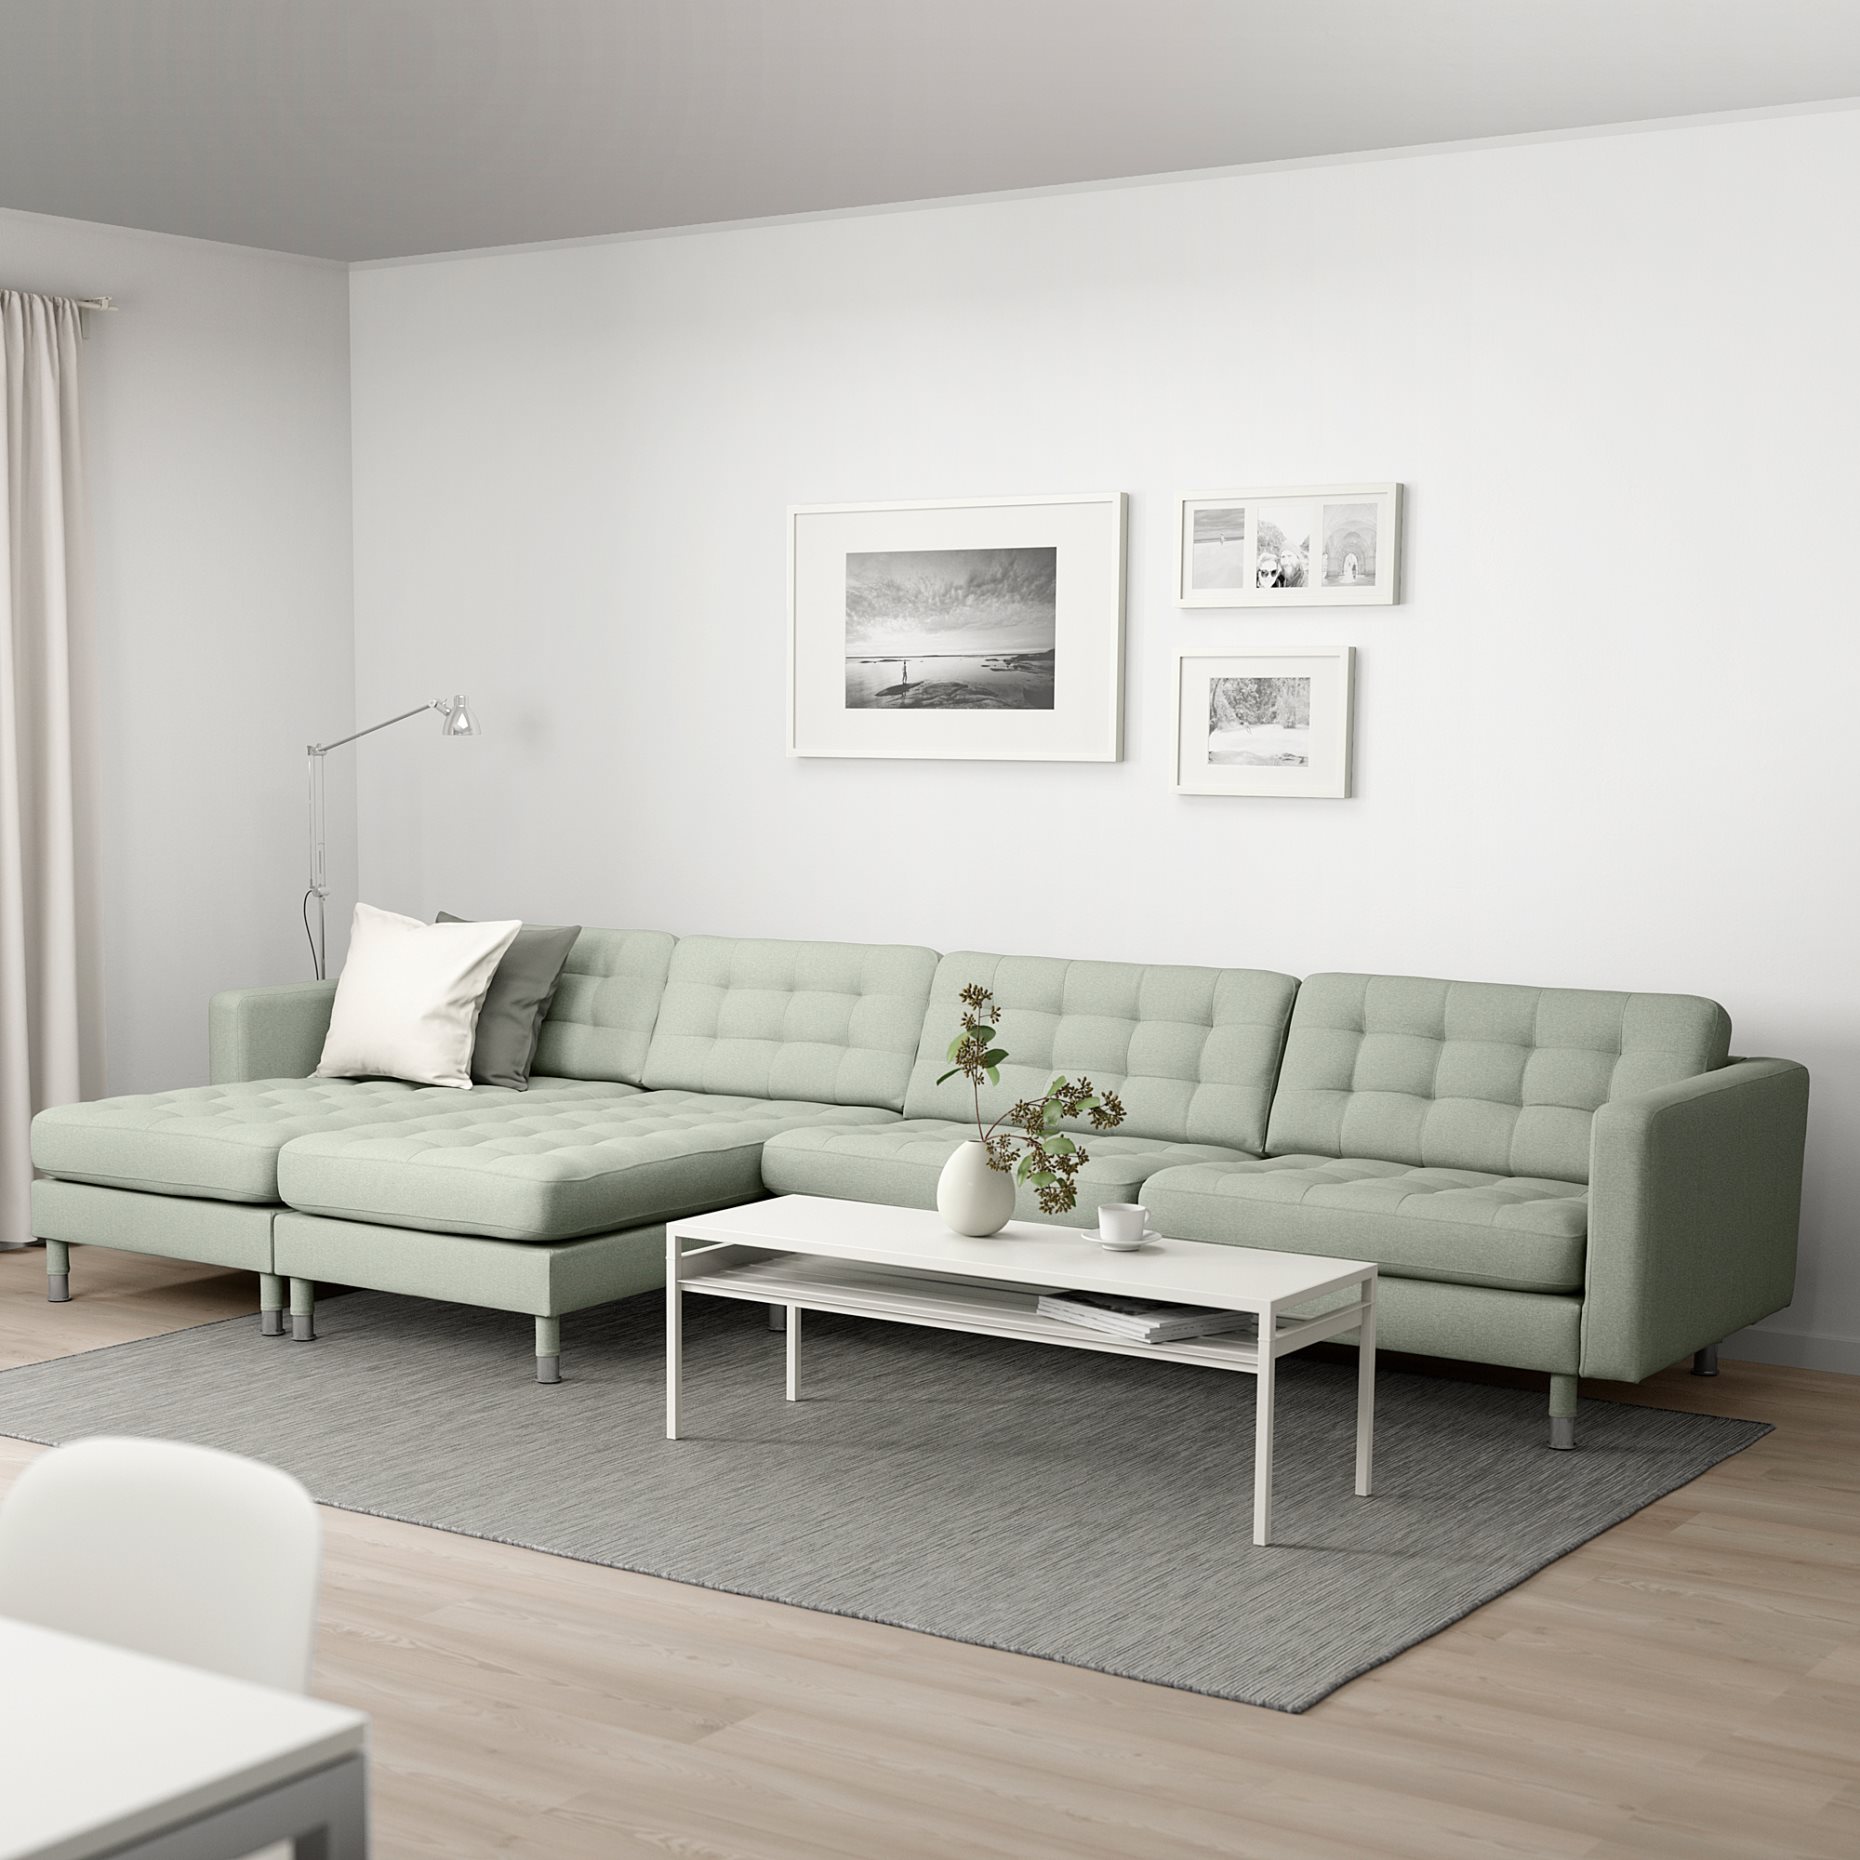 LANDSKRONA, 5-seat sofa with chaise longues, 392.699.88